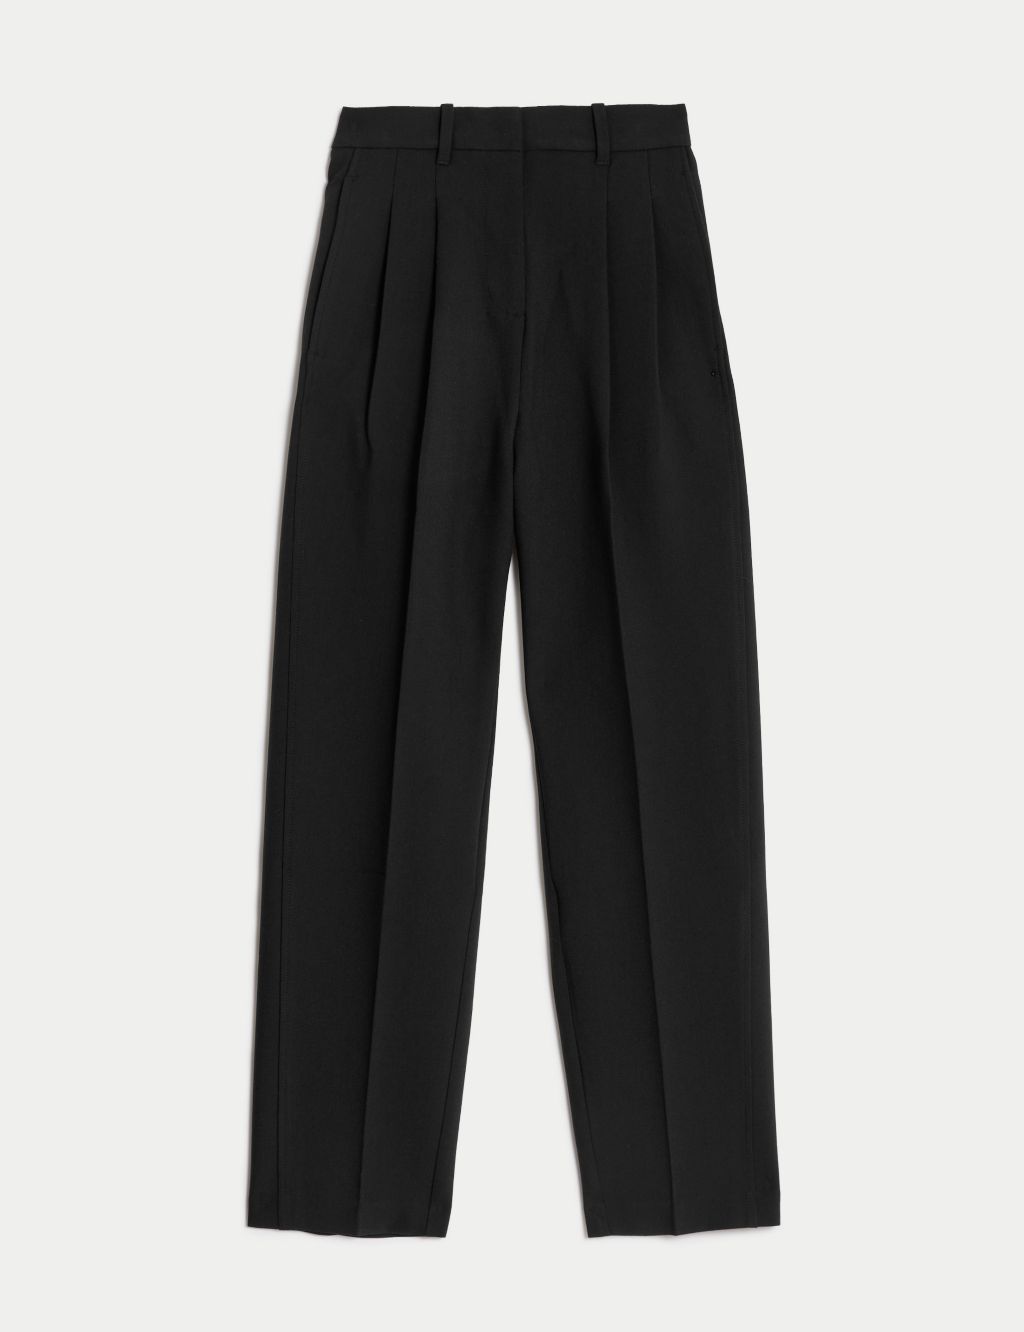 Relaxed Tapered Ankle Grazer Trousers image 2